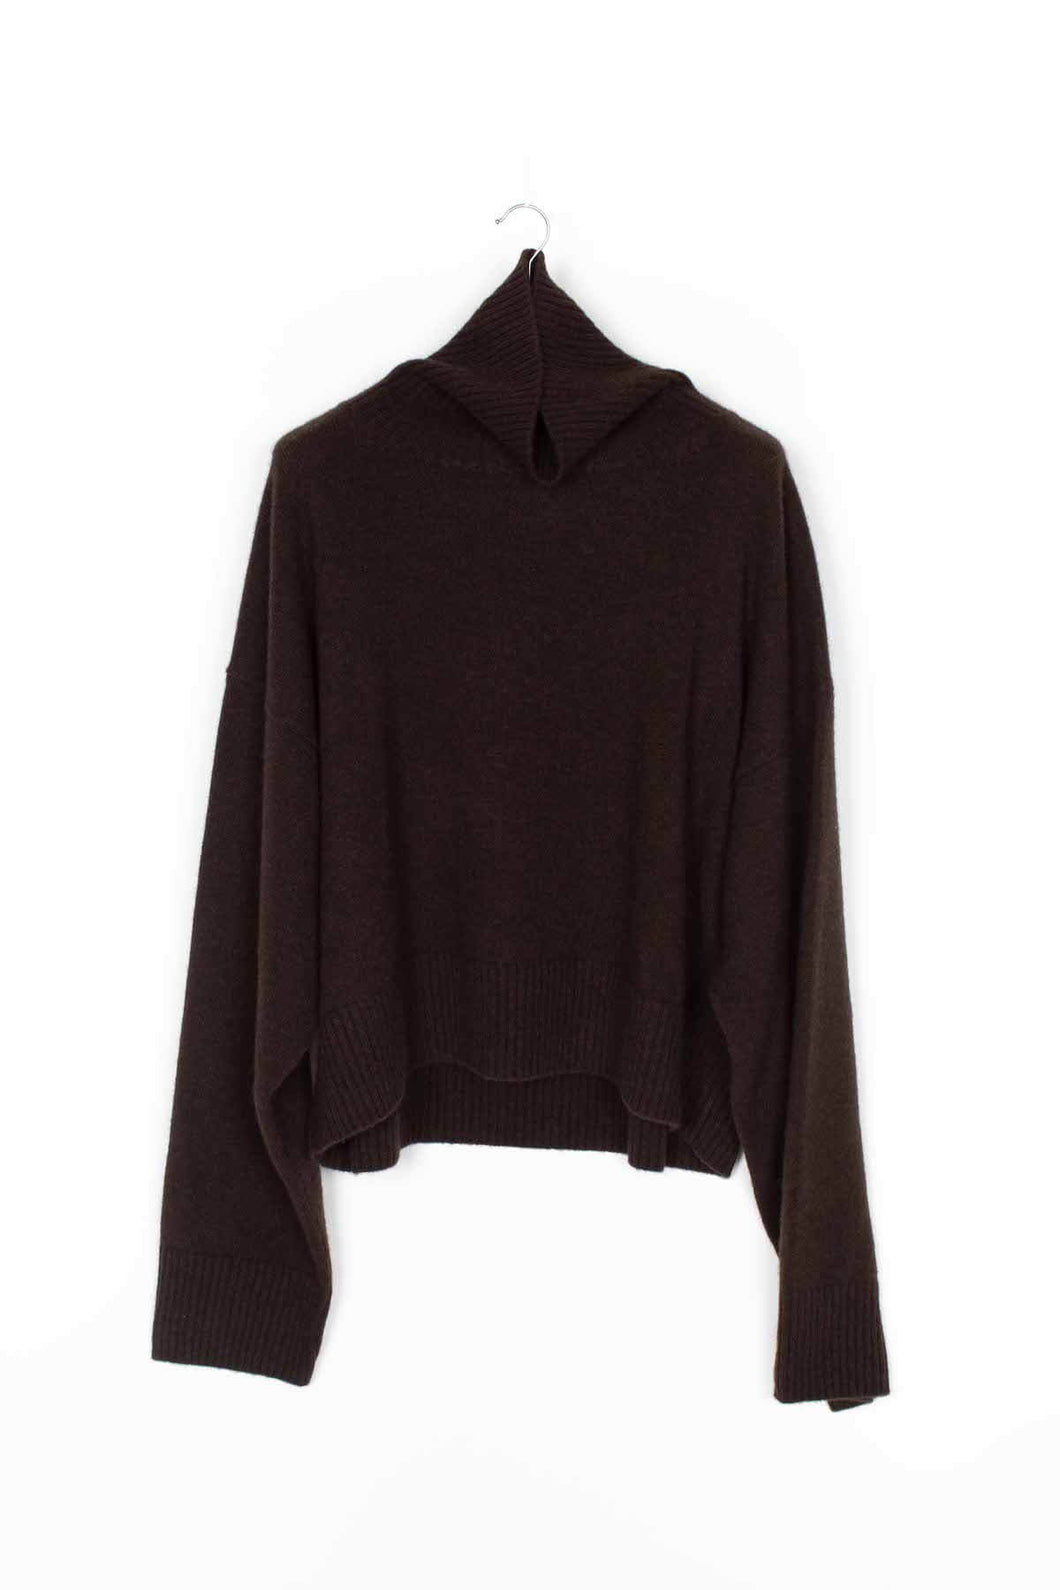 EXTRAOVER HIGHNECK SWEATER